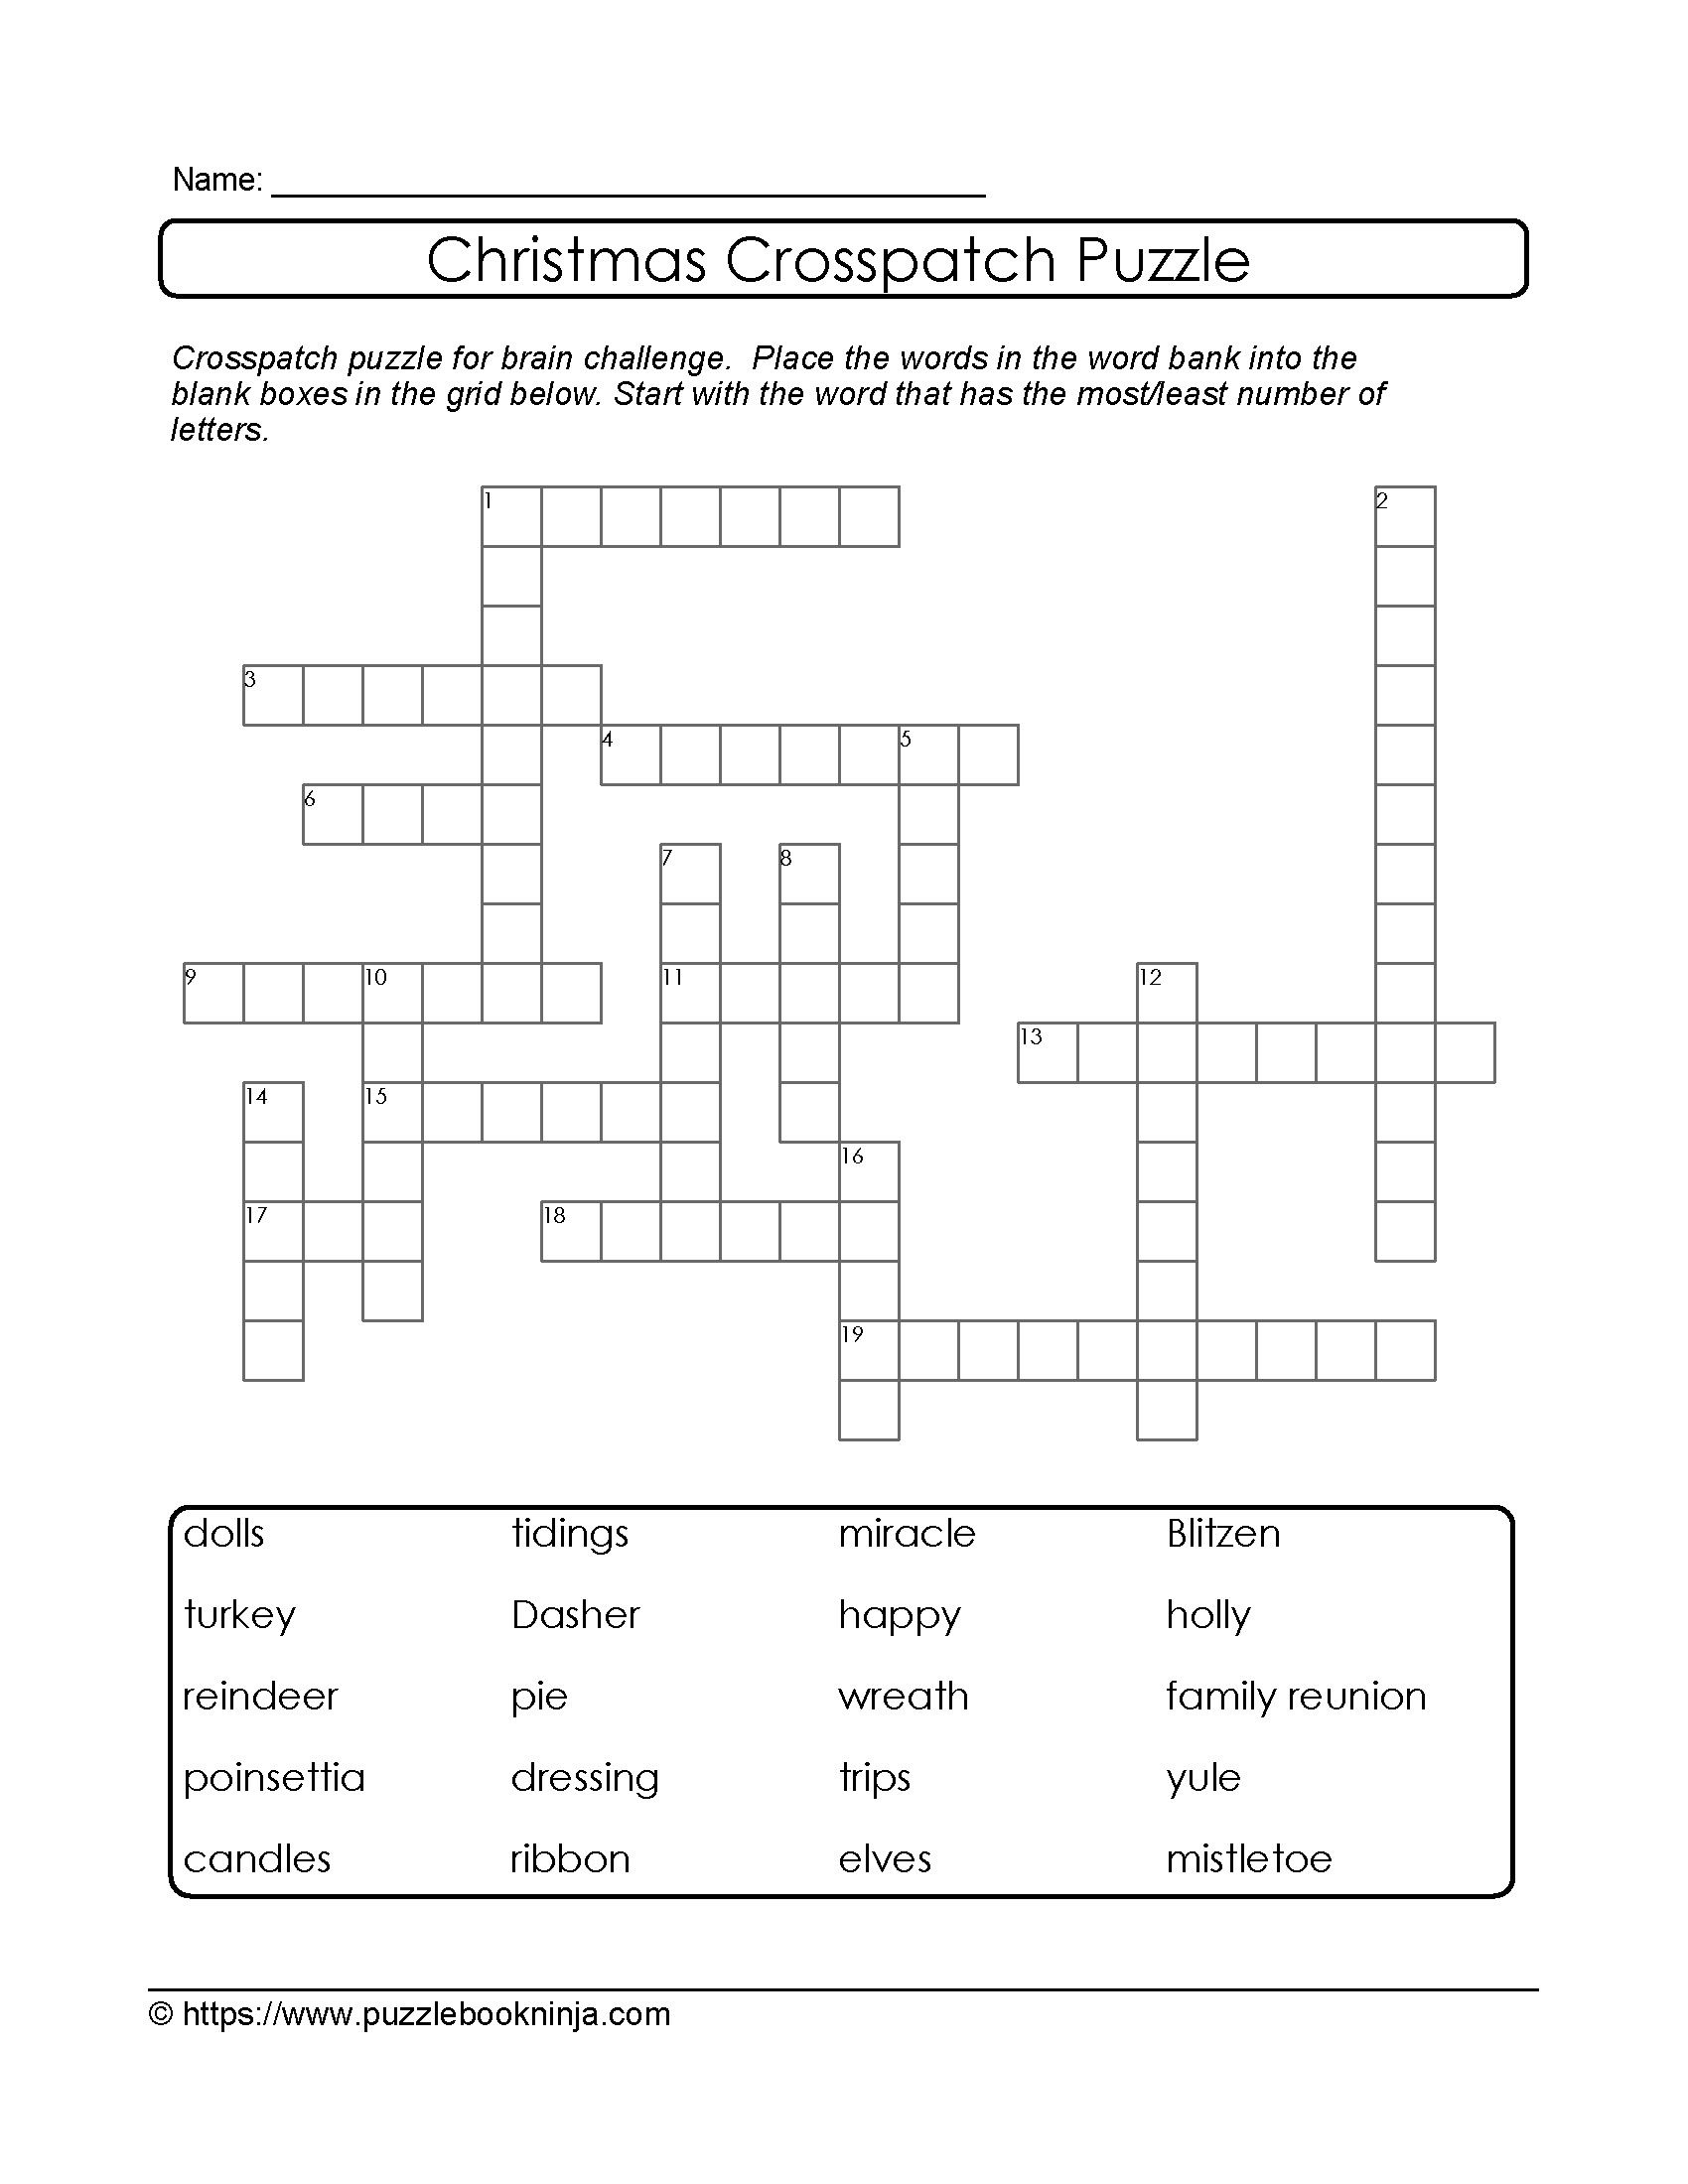 Crosspatch Xmas Printable Puzzle. Support Vocab Development And - Printable Vocabulary Crossword Puzzles